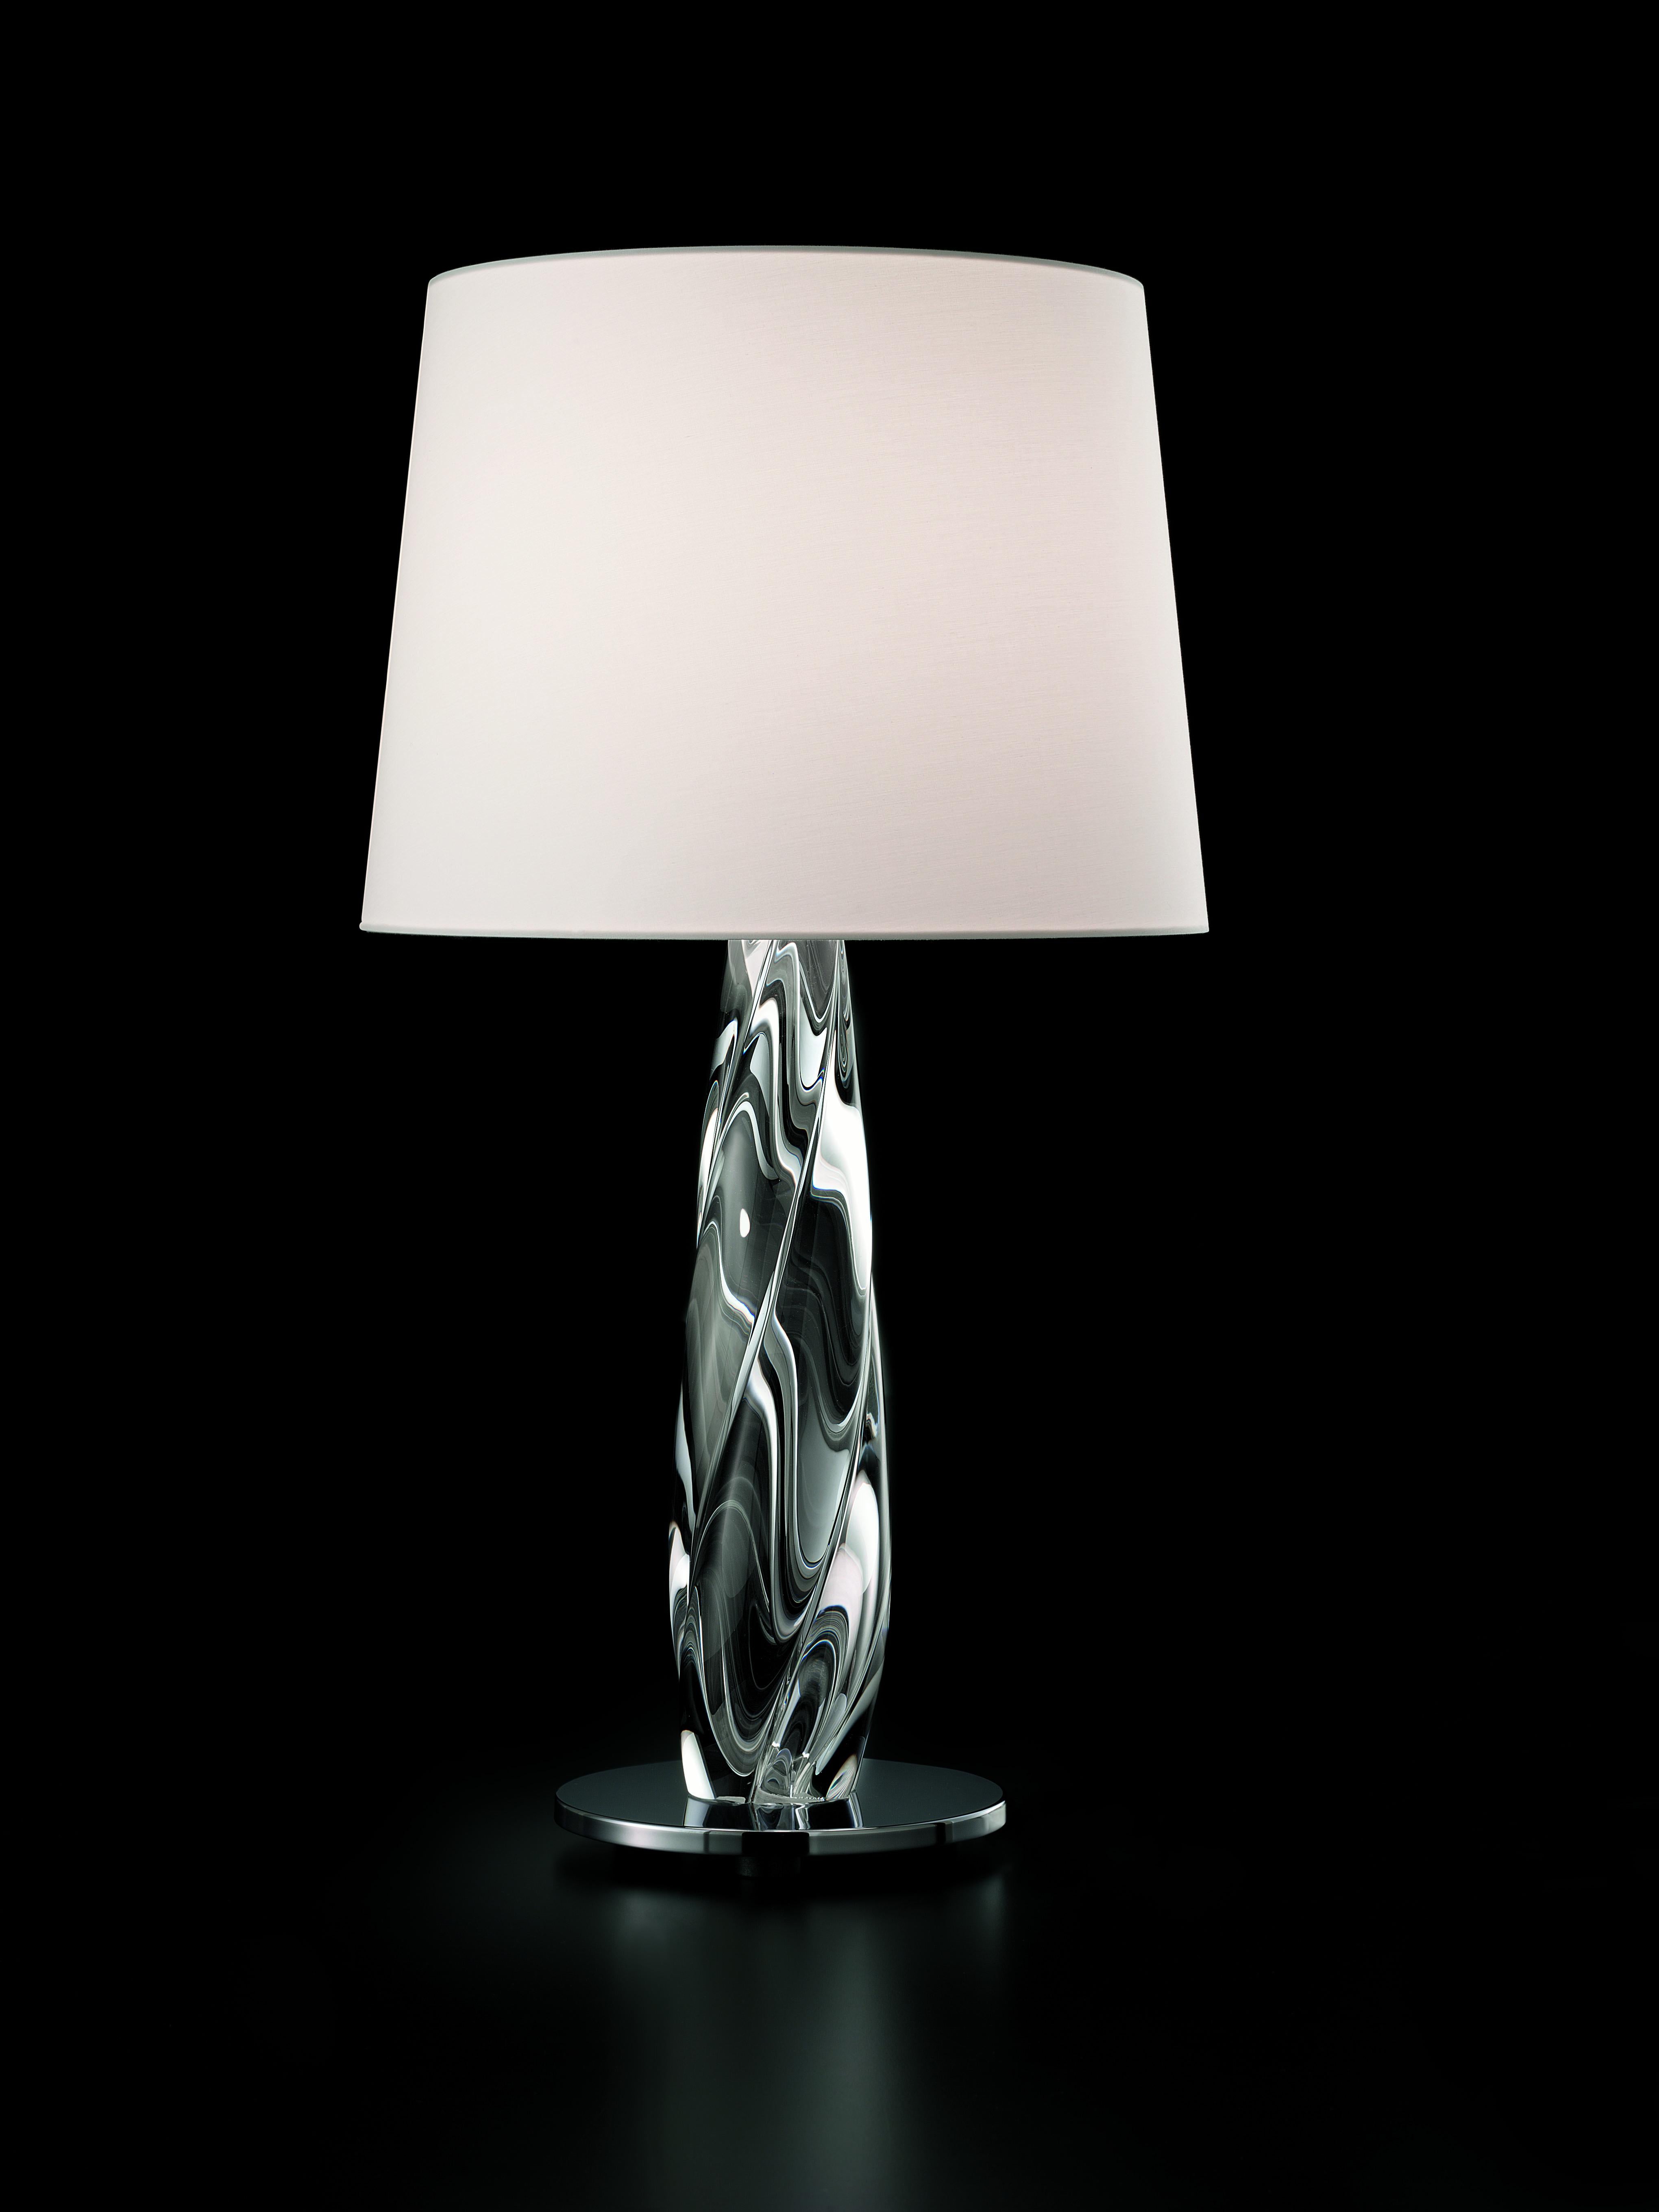 chrome lamps with white shades